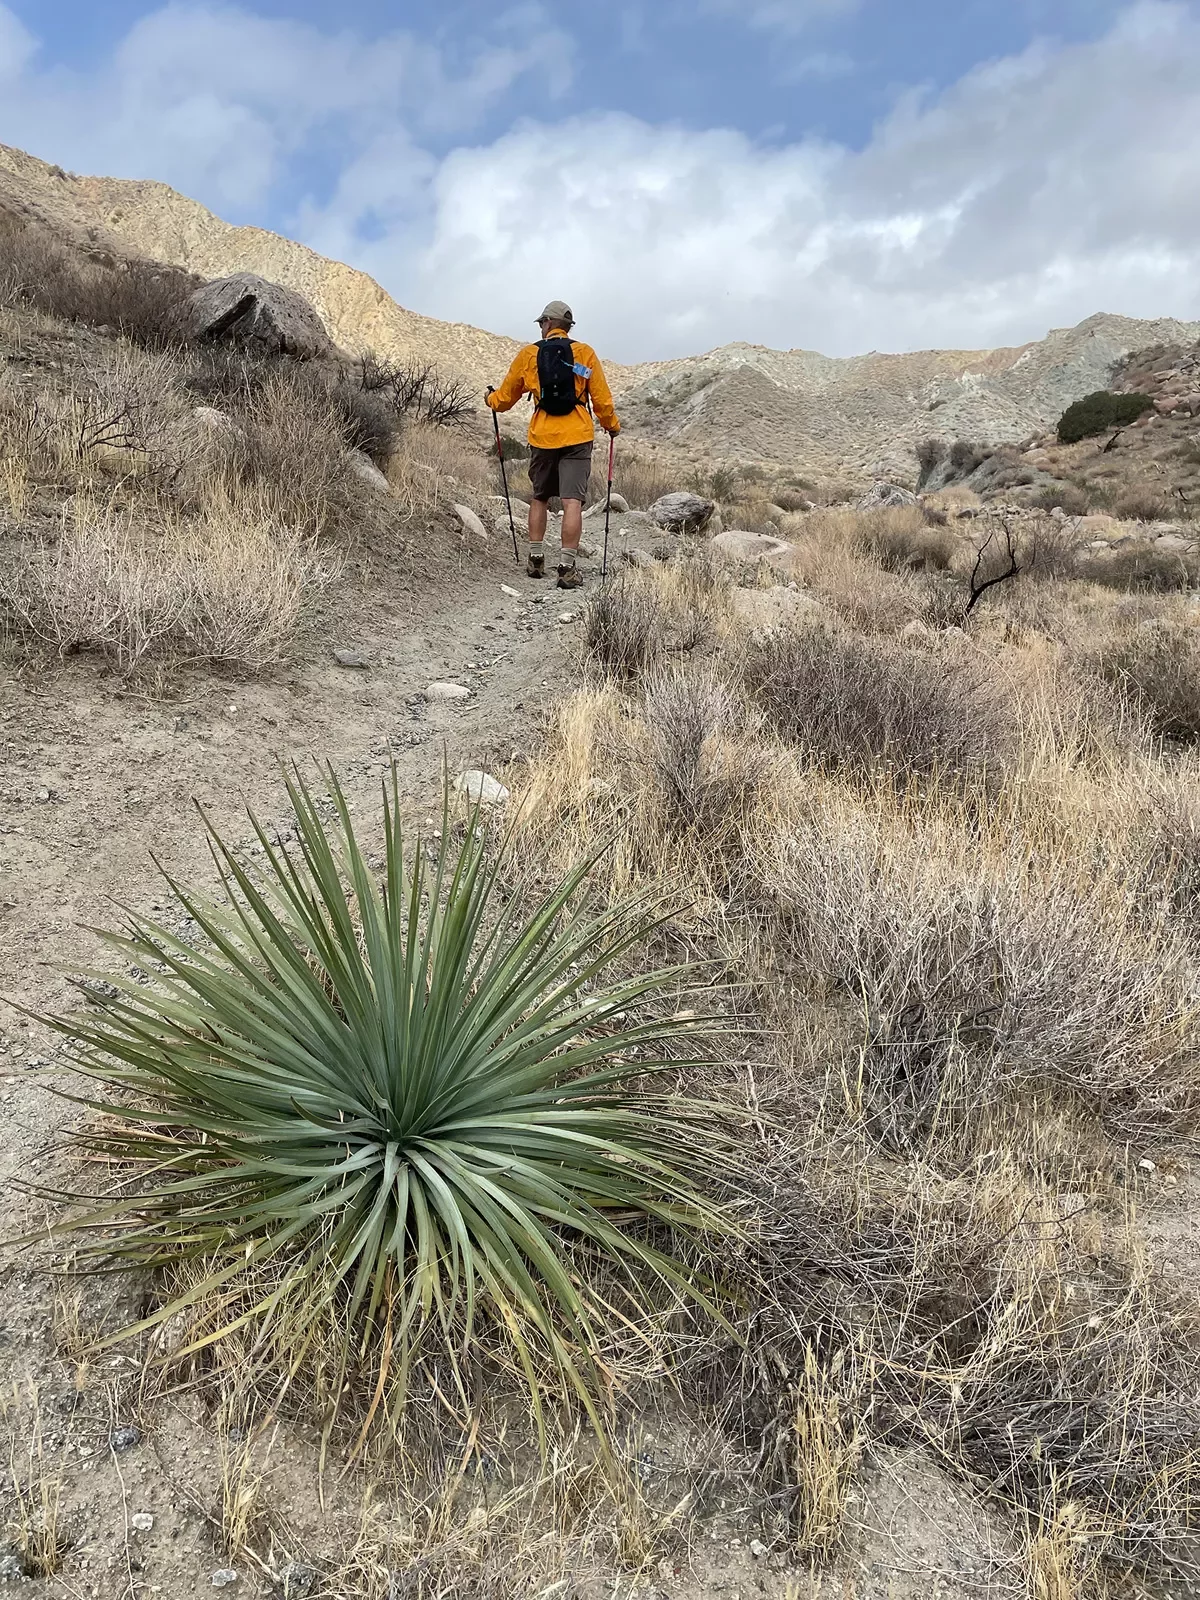 Guest hiking among arid terrain, desert plant in foreground.